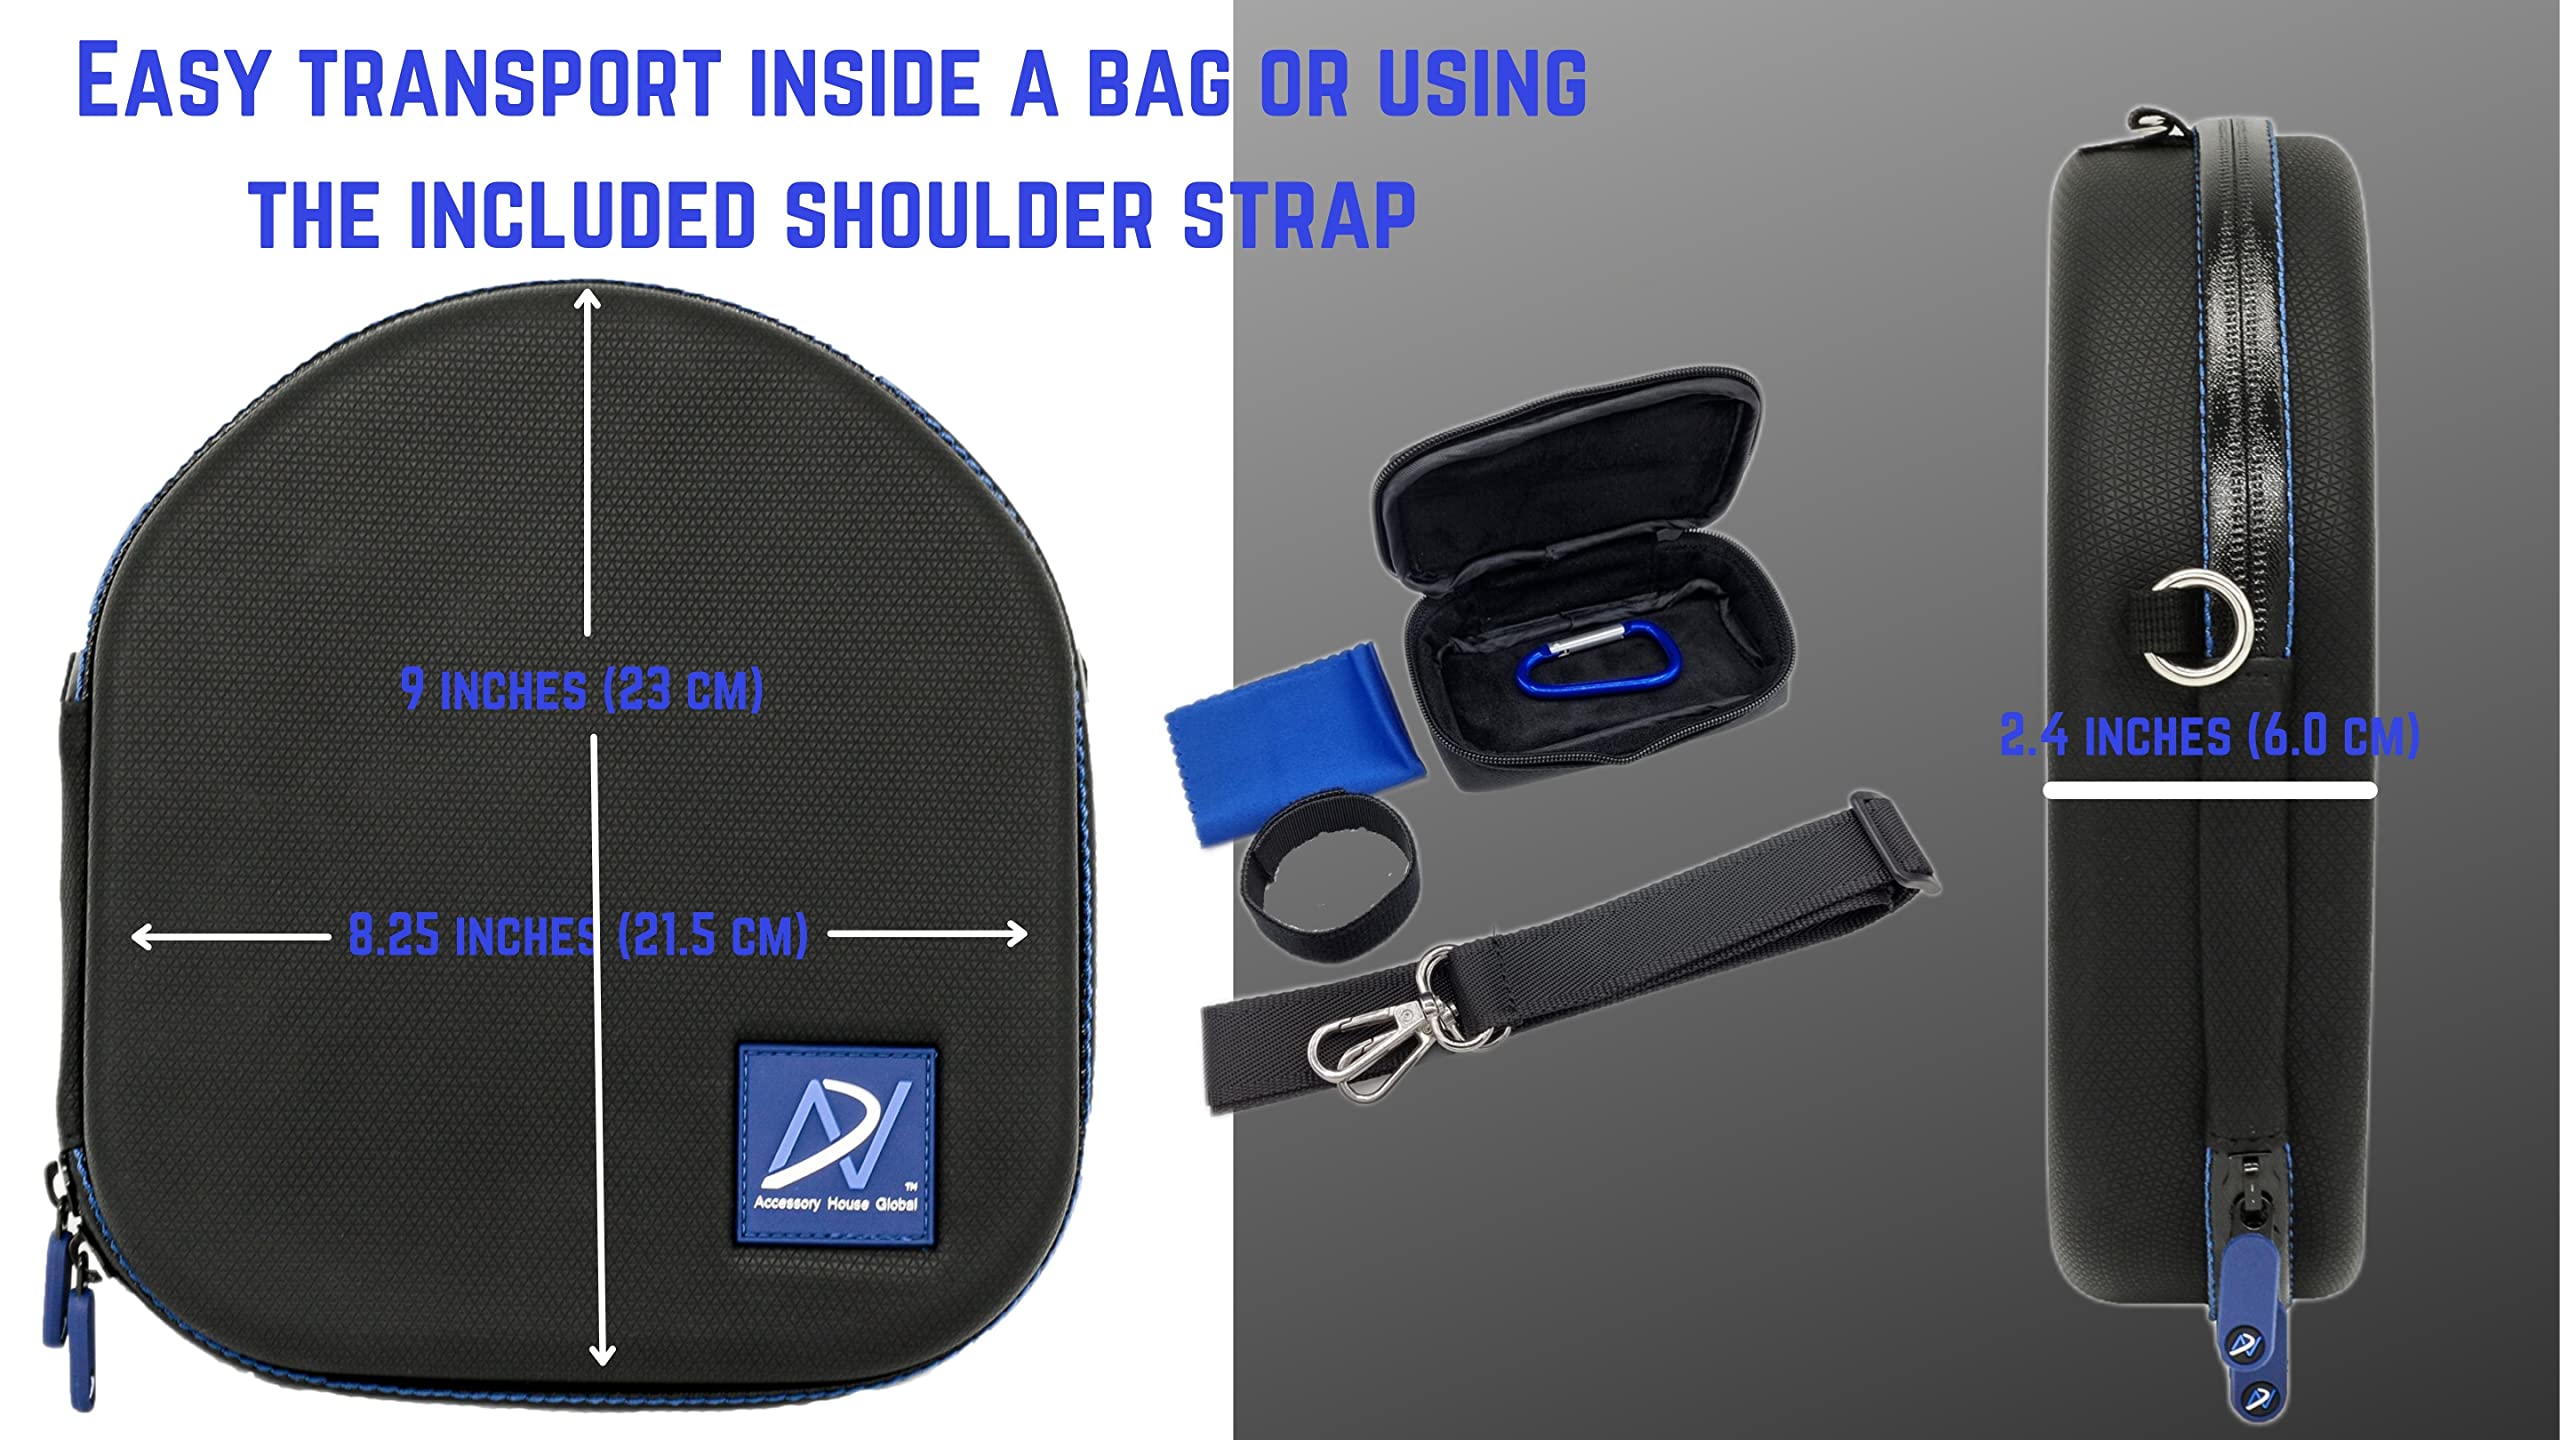 Premium Carrying case Compatible with Grado SR60 SR80 SR125 SR225 SR325, RS1 RS2, Alessandro MS-, PS500e, GH1 GH2 GH3 GH4 and GW100 Headphones. Grip-TECH 2 Outer Liner Easy Transport